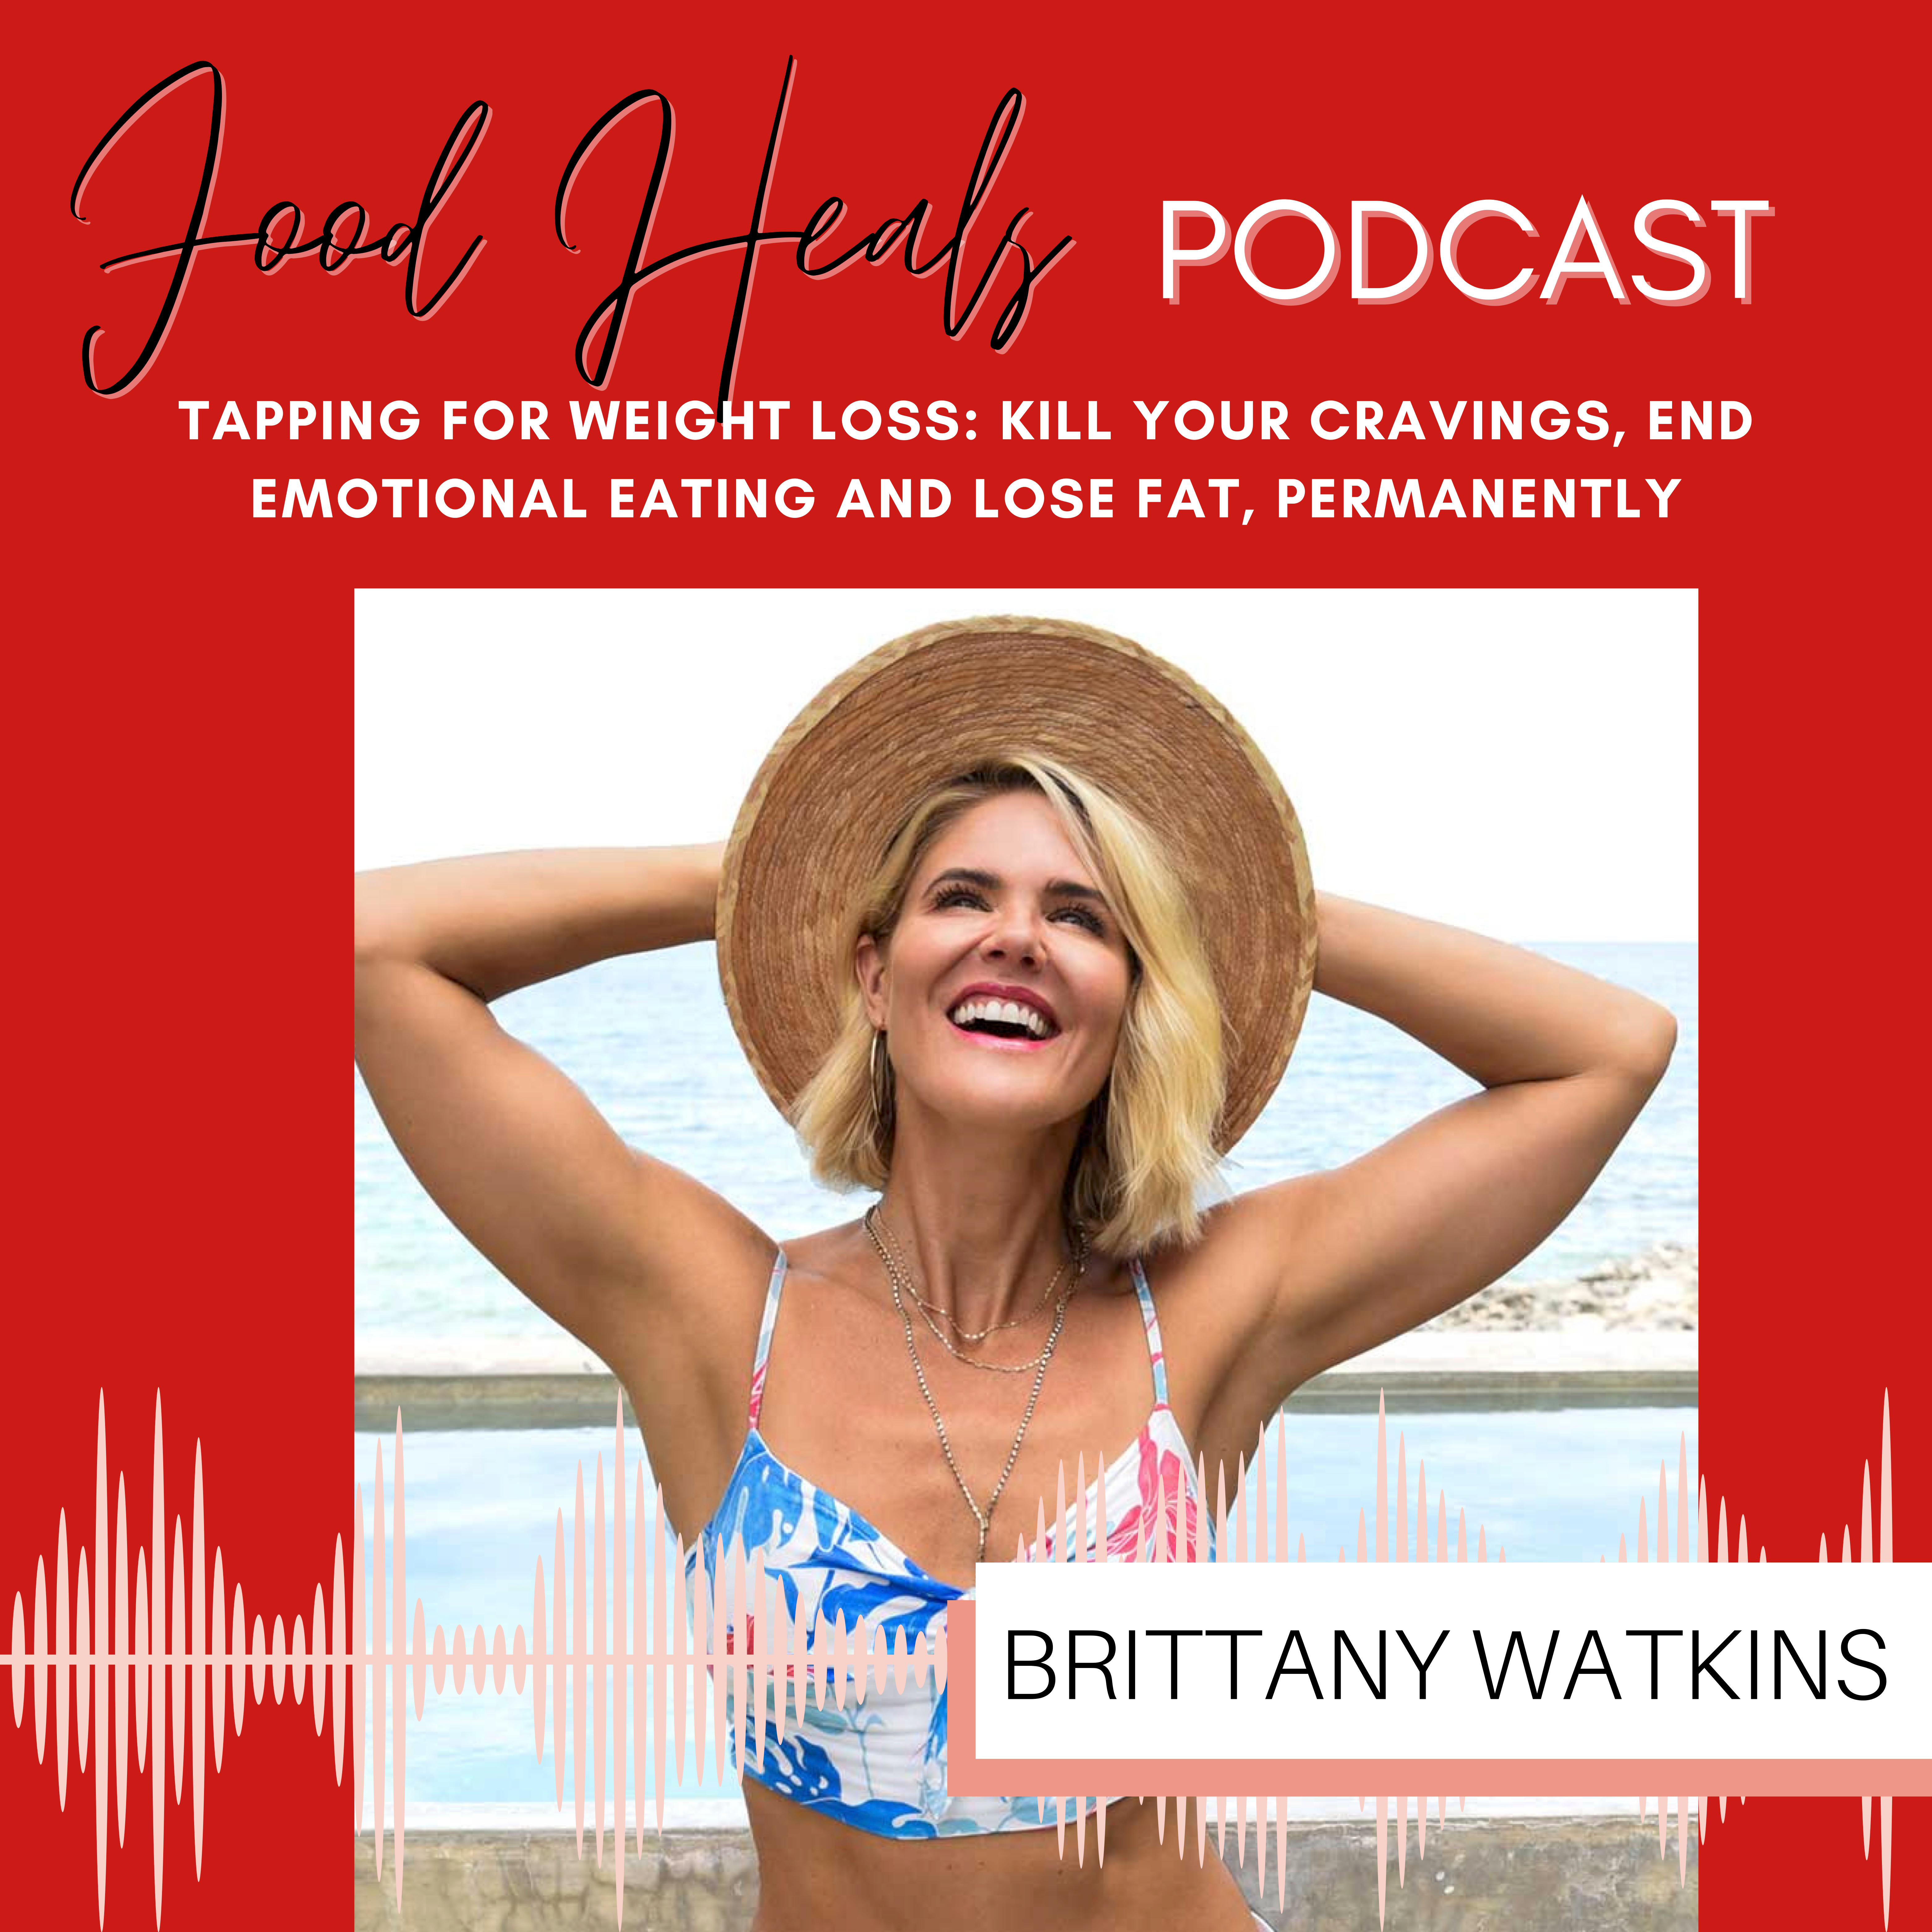 Food Heals Podcast with Brittany Watkins